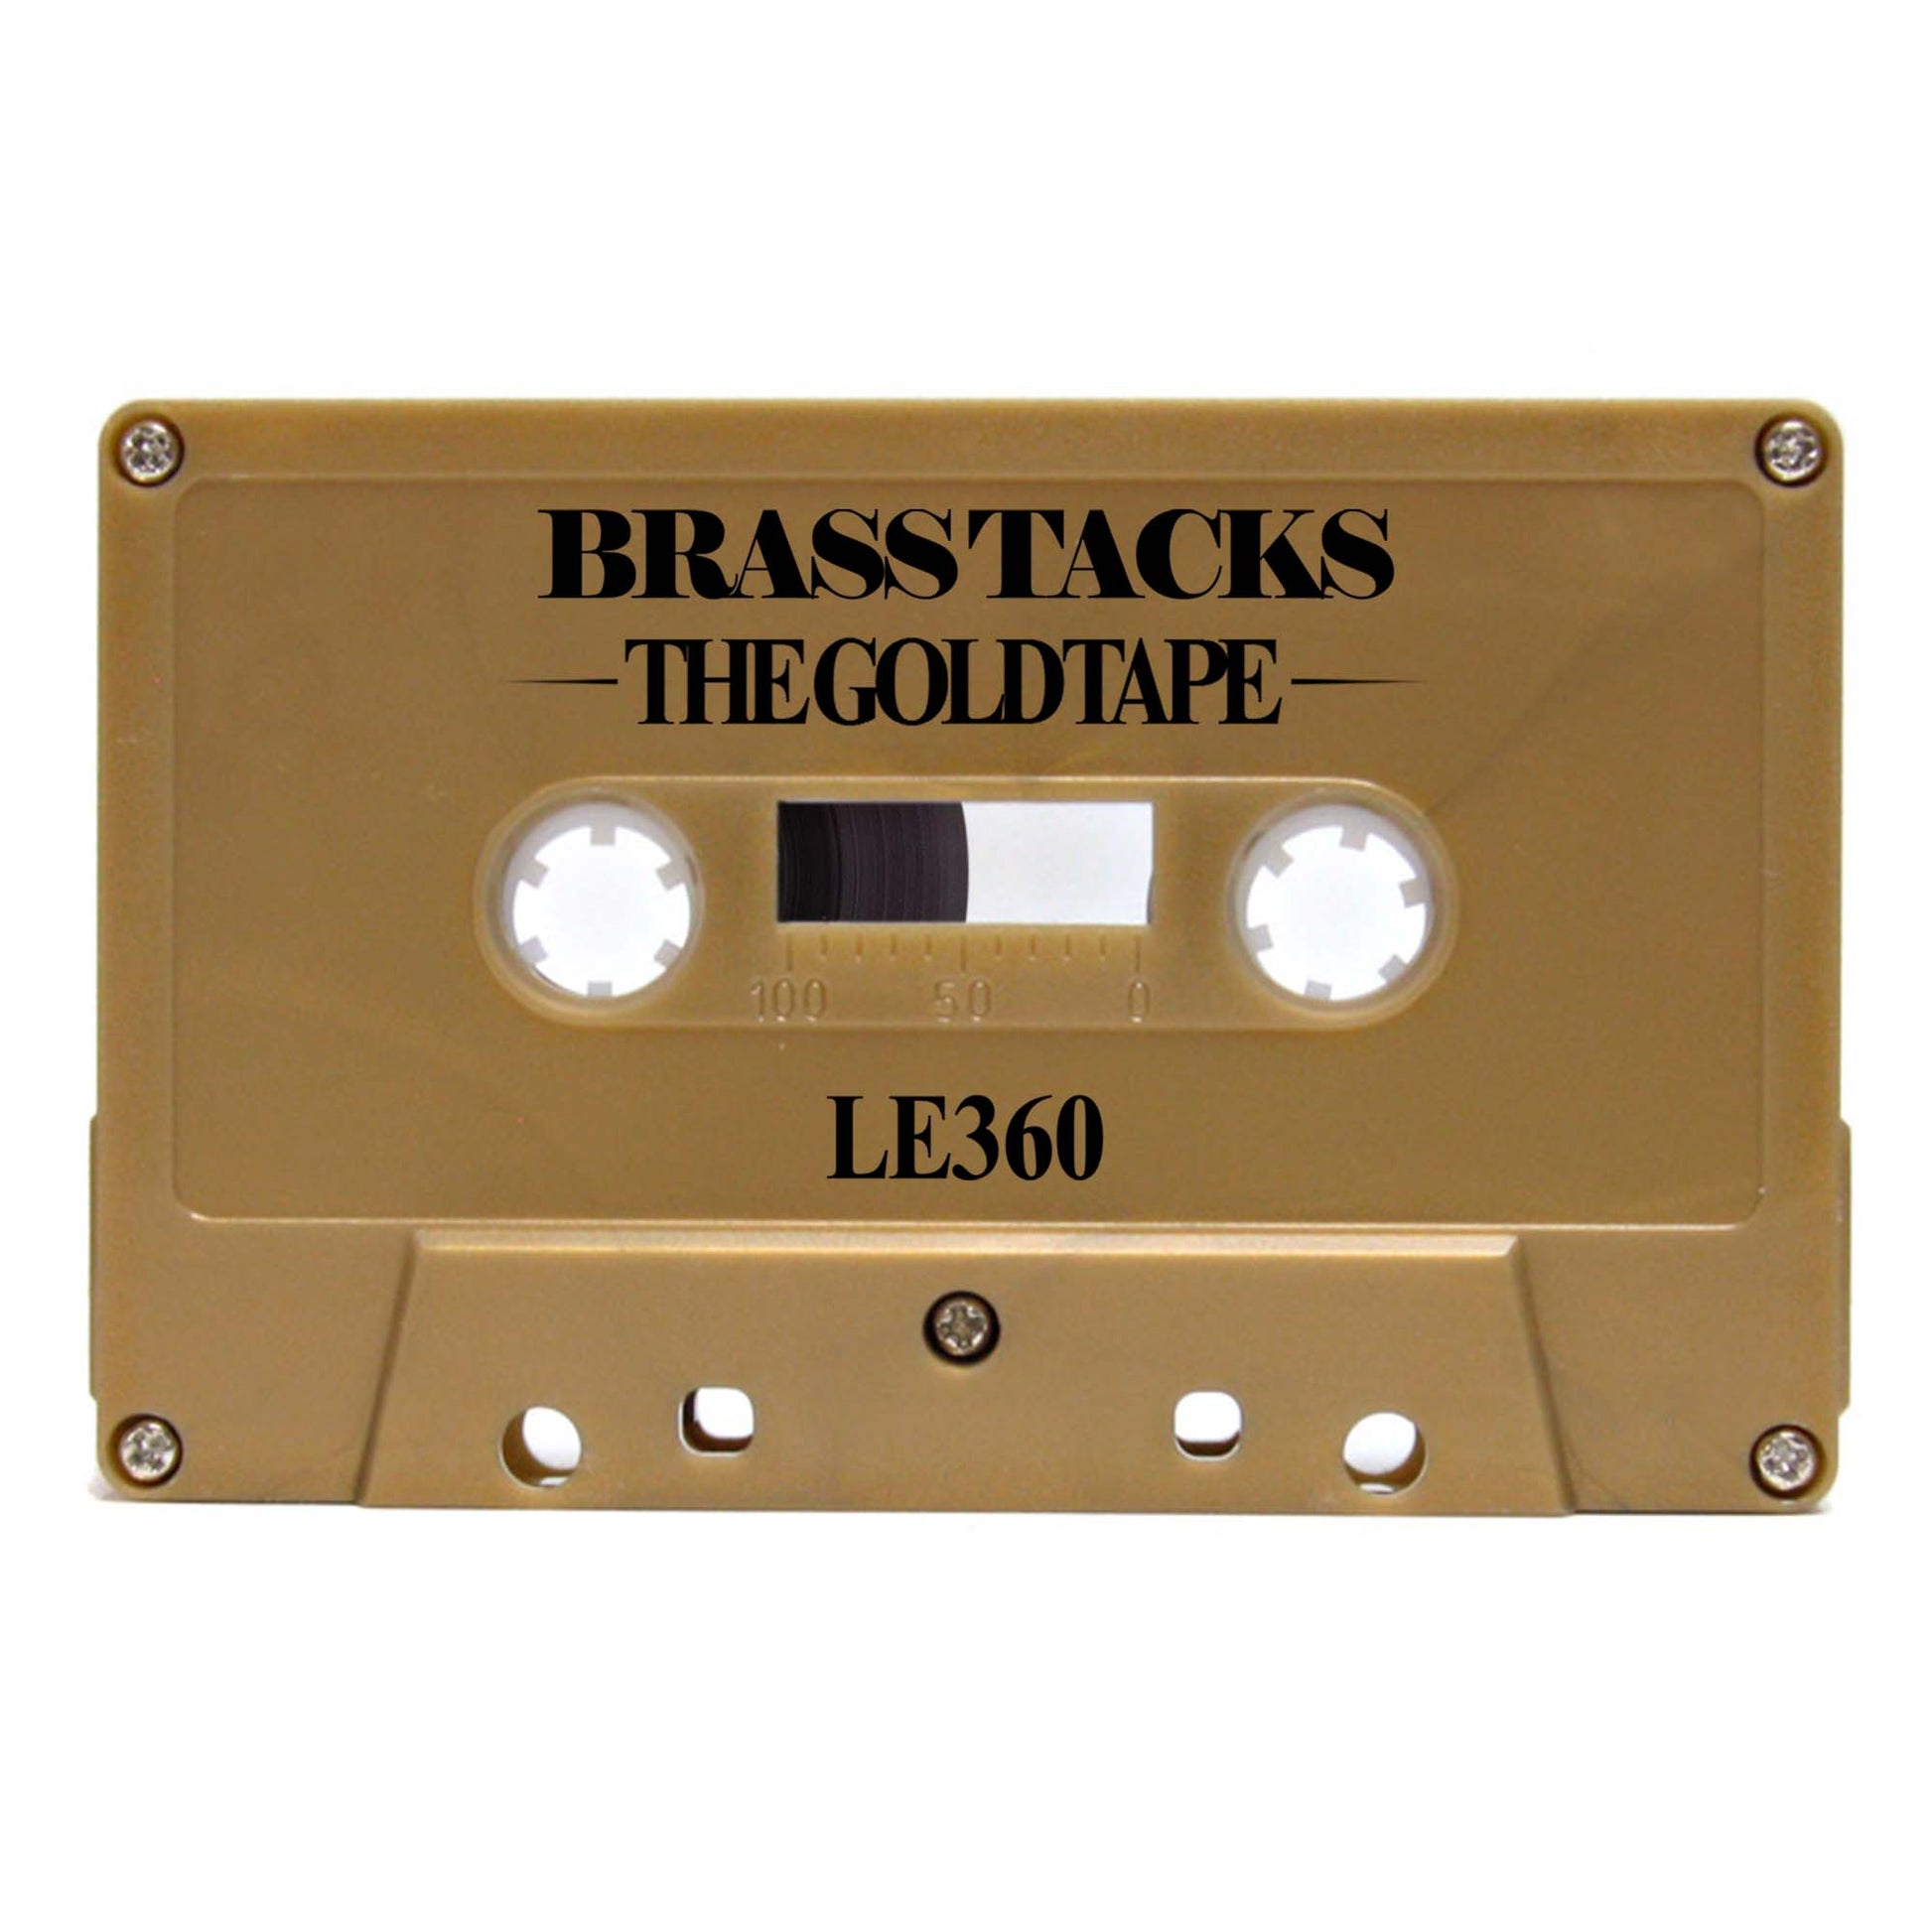 The Gold Tape, Brass Tacks